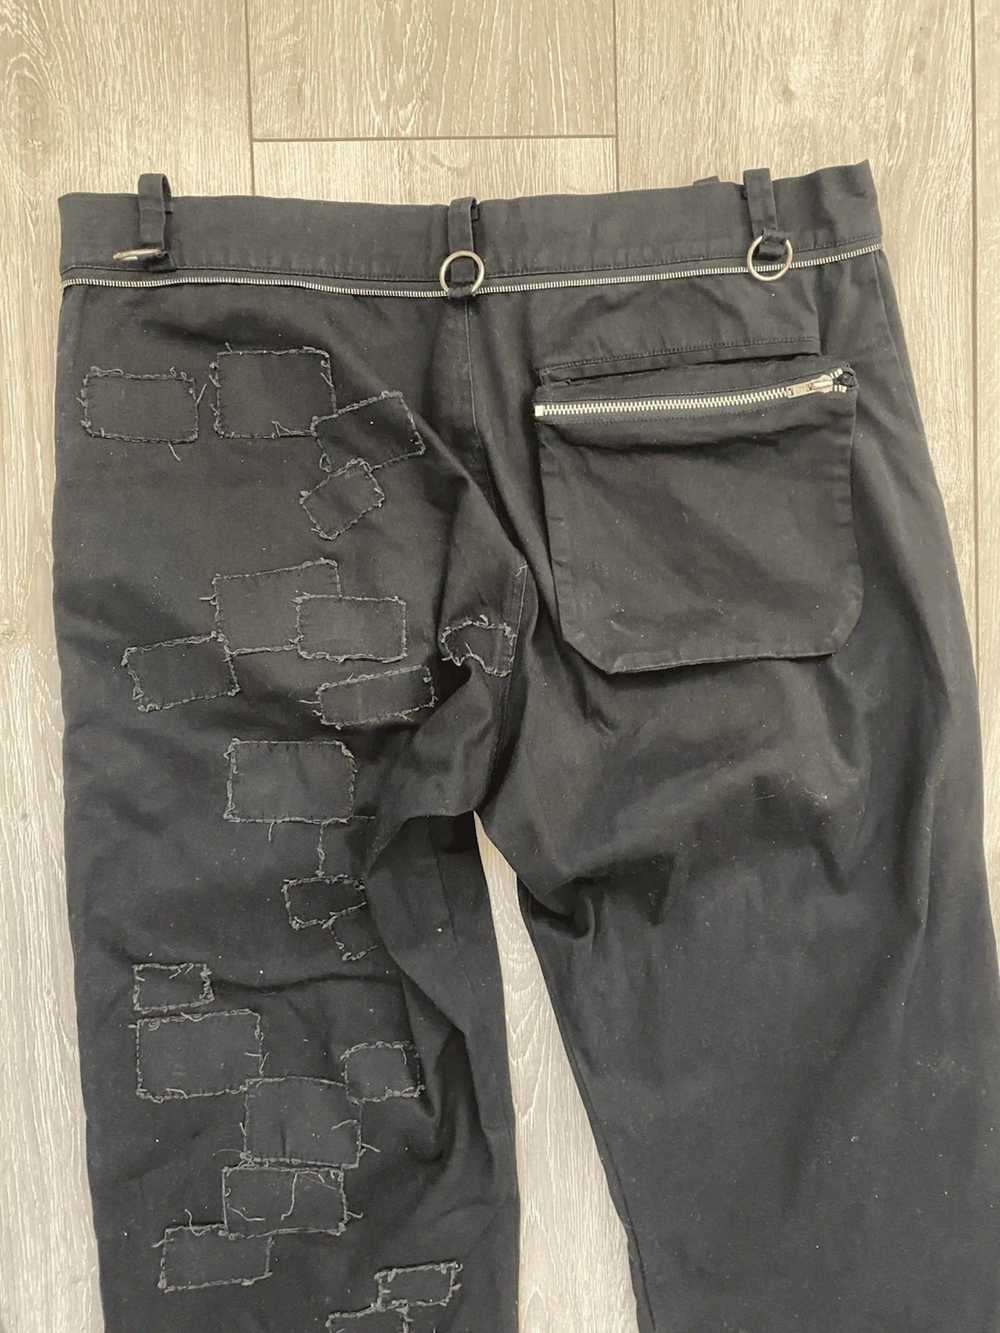 Undercover Undercover SS03 Scab Pants Patchwork - image 4